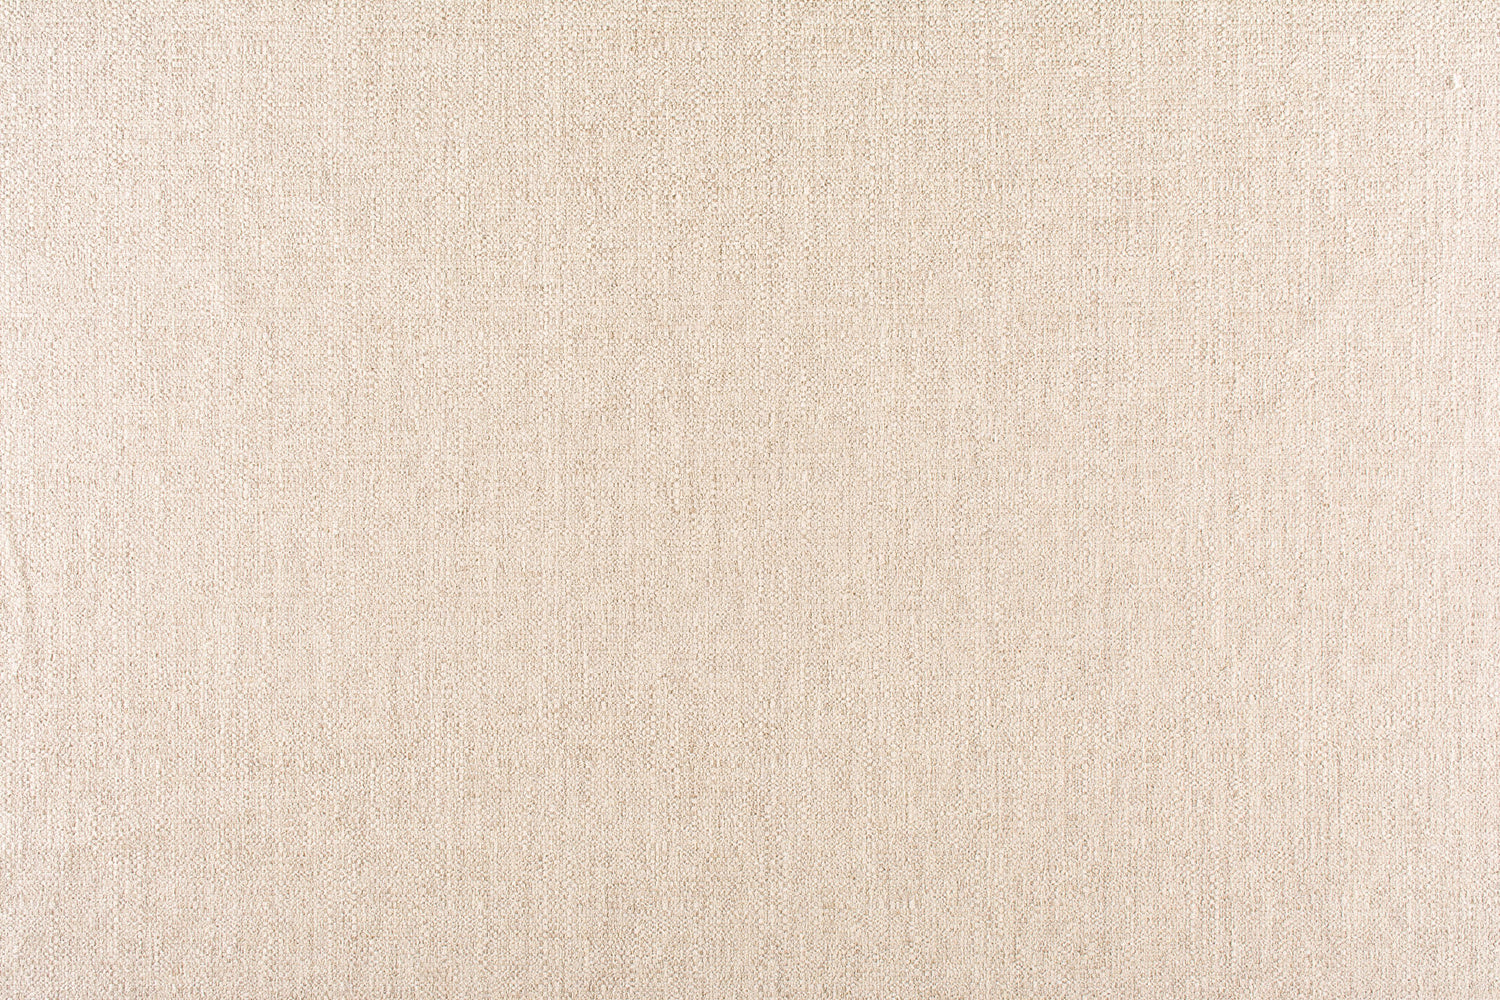 Creekstone Texture fabric in ivory color - pattern number EA 00011514 - by Scalamandre in the Old World Weavers collection